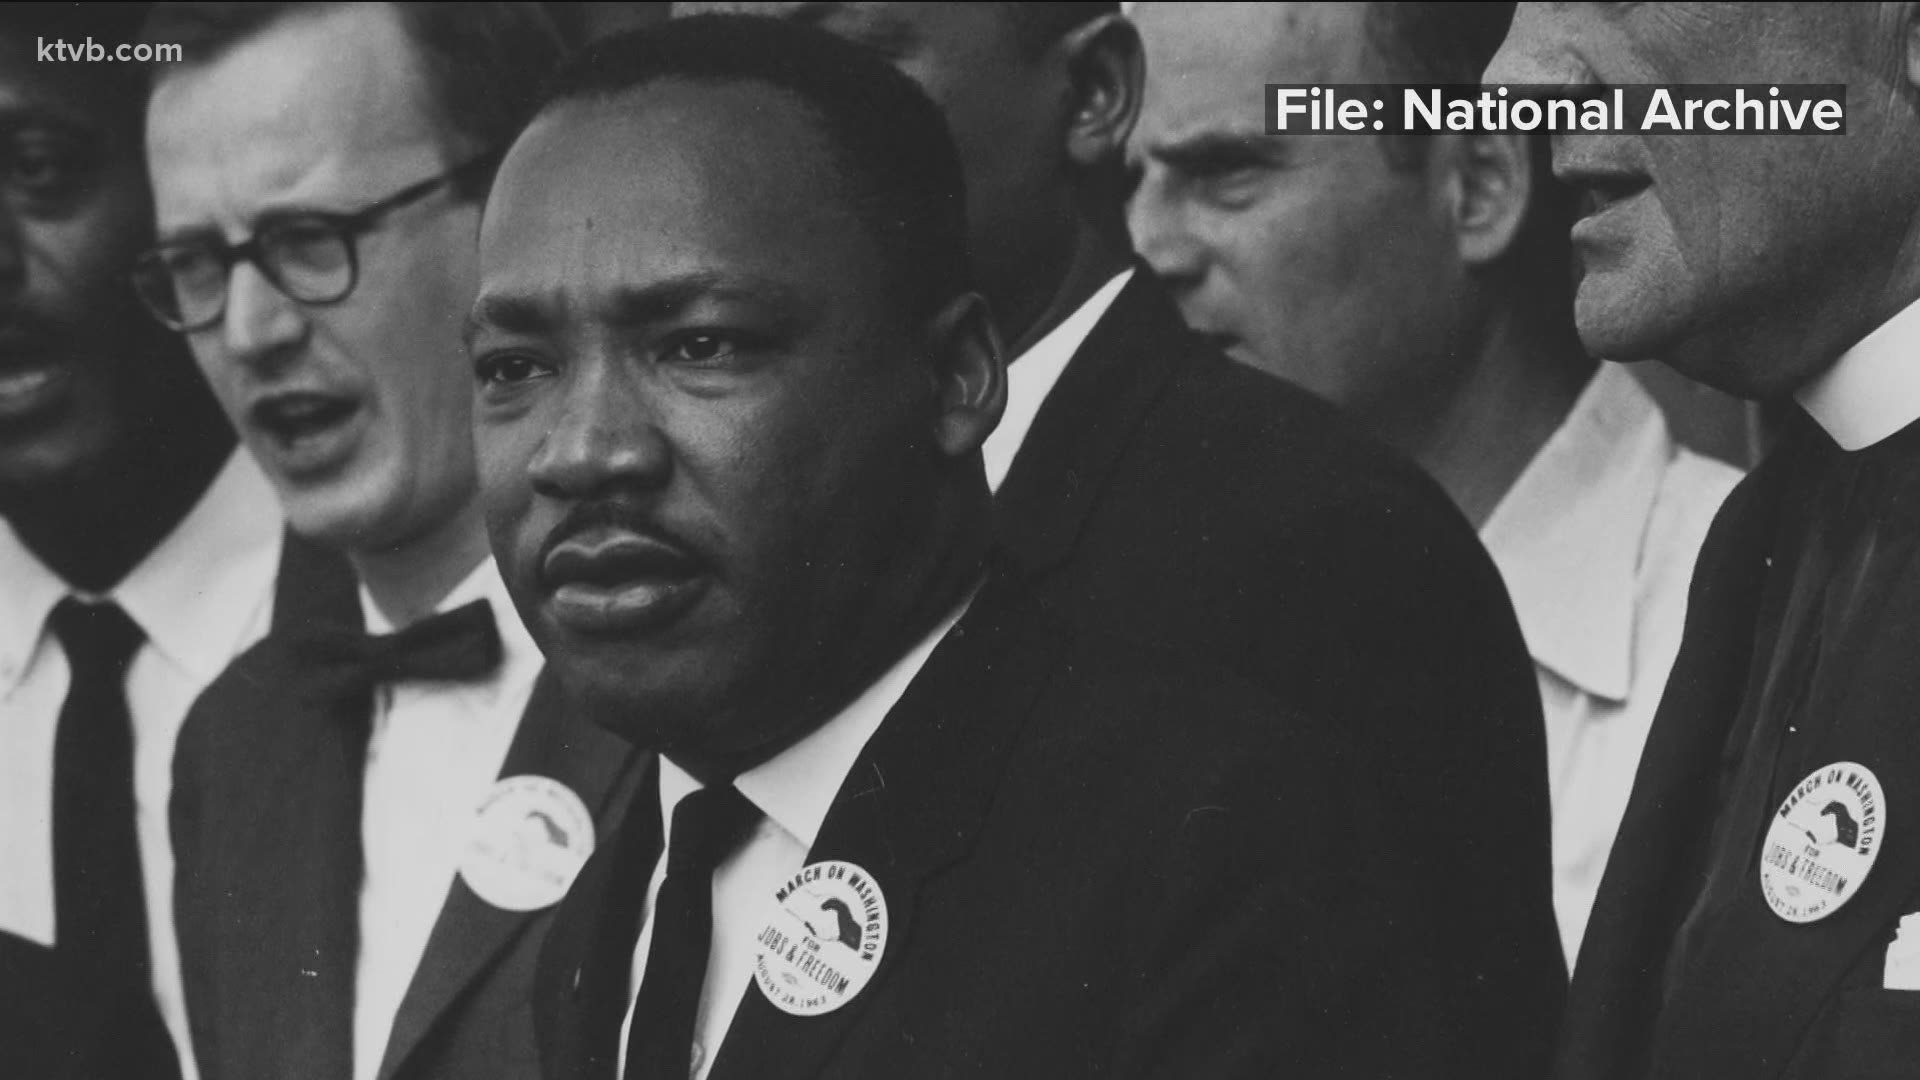 Idaho was actually one of the last states to recognize MLK Day as a state holiday.